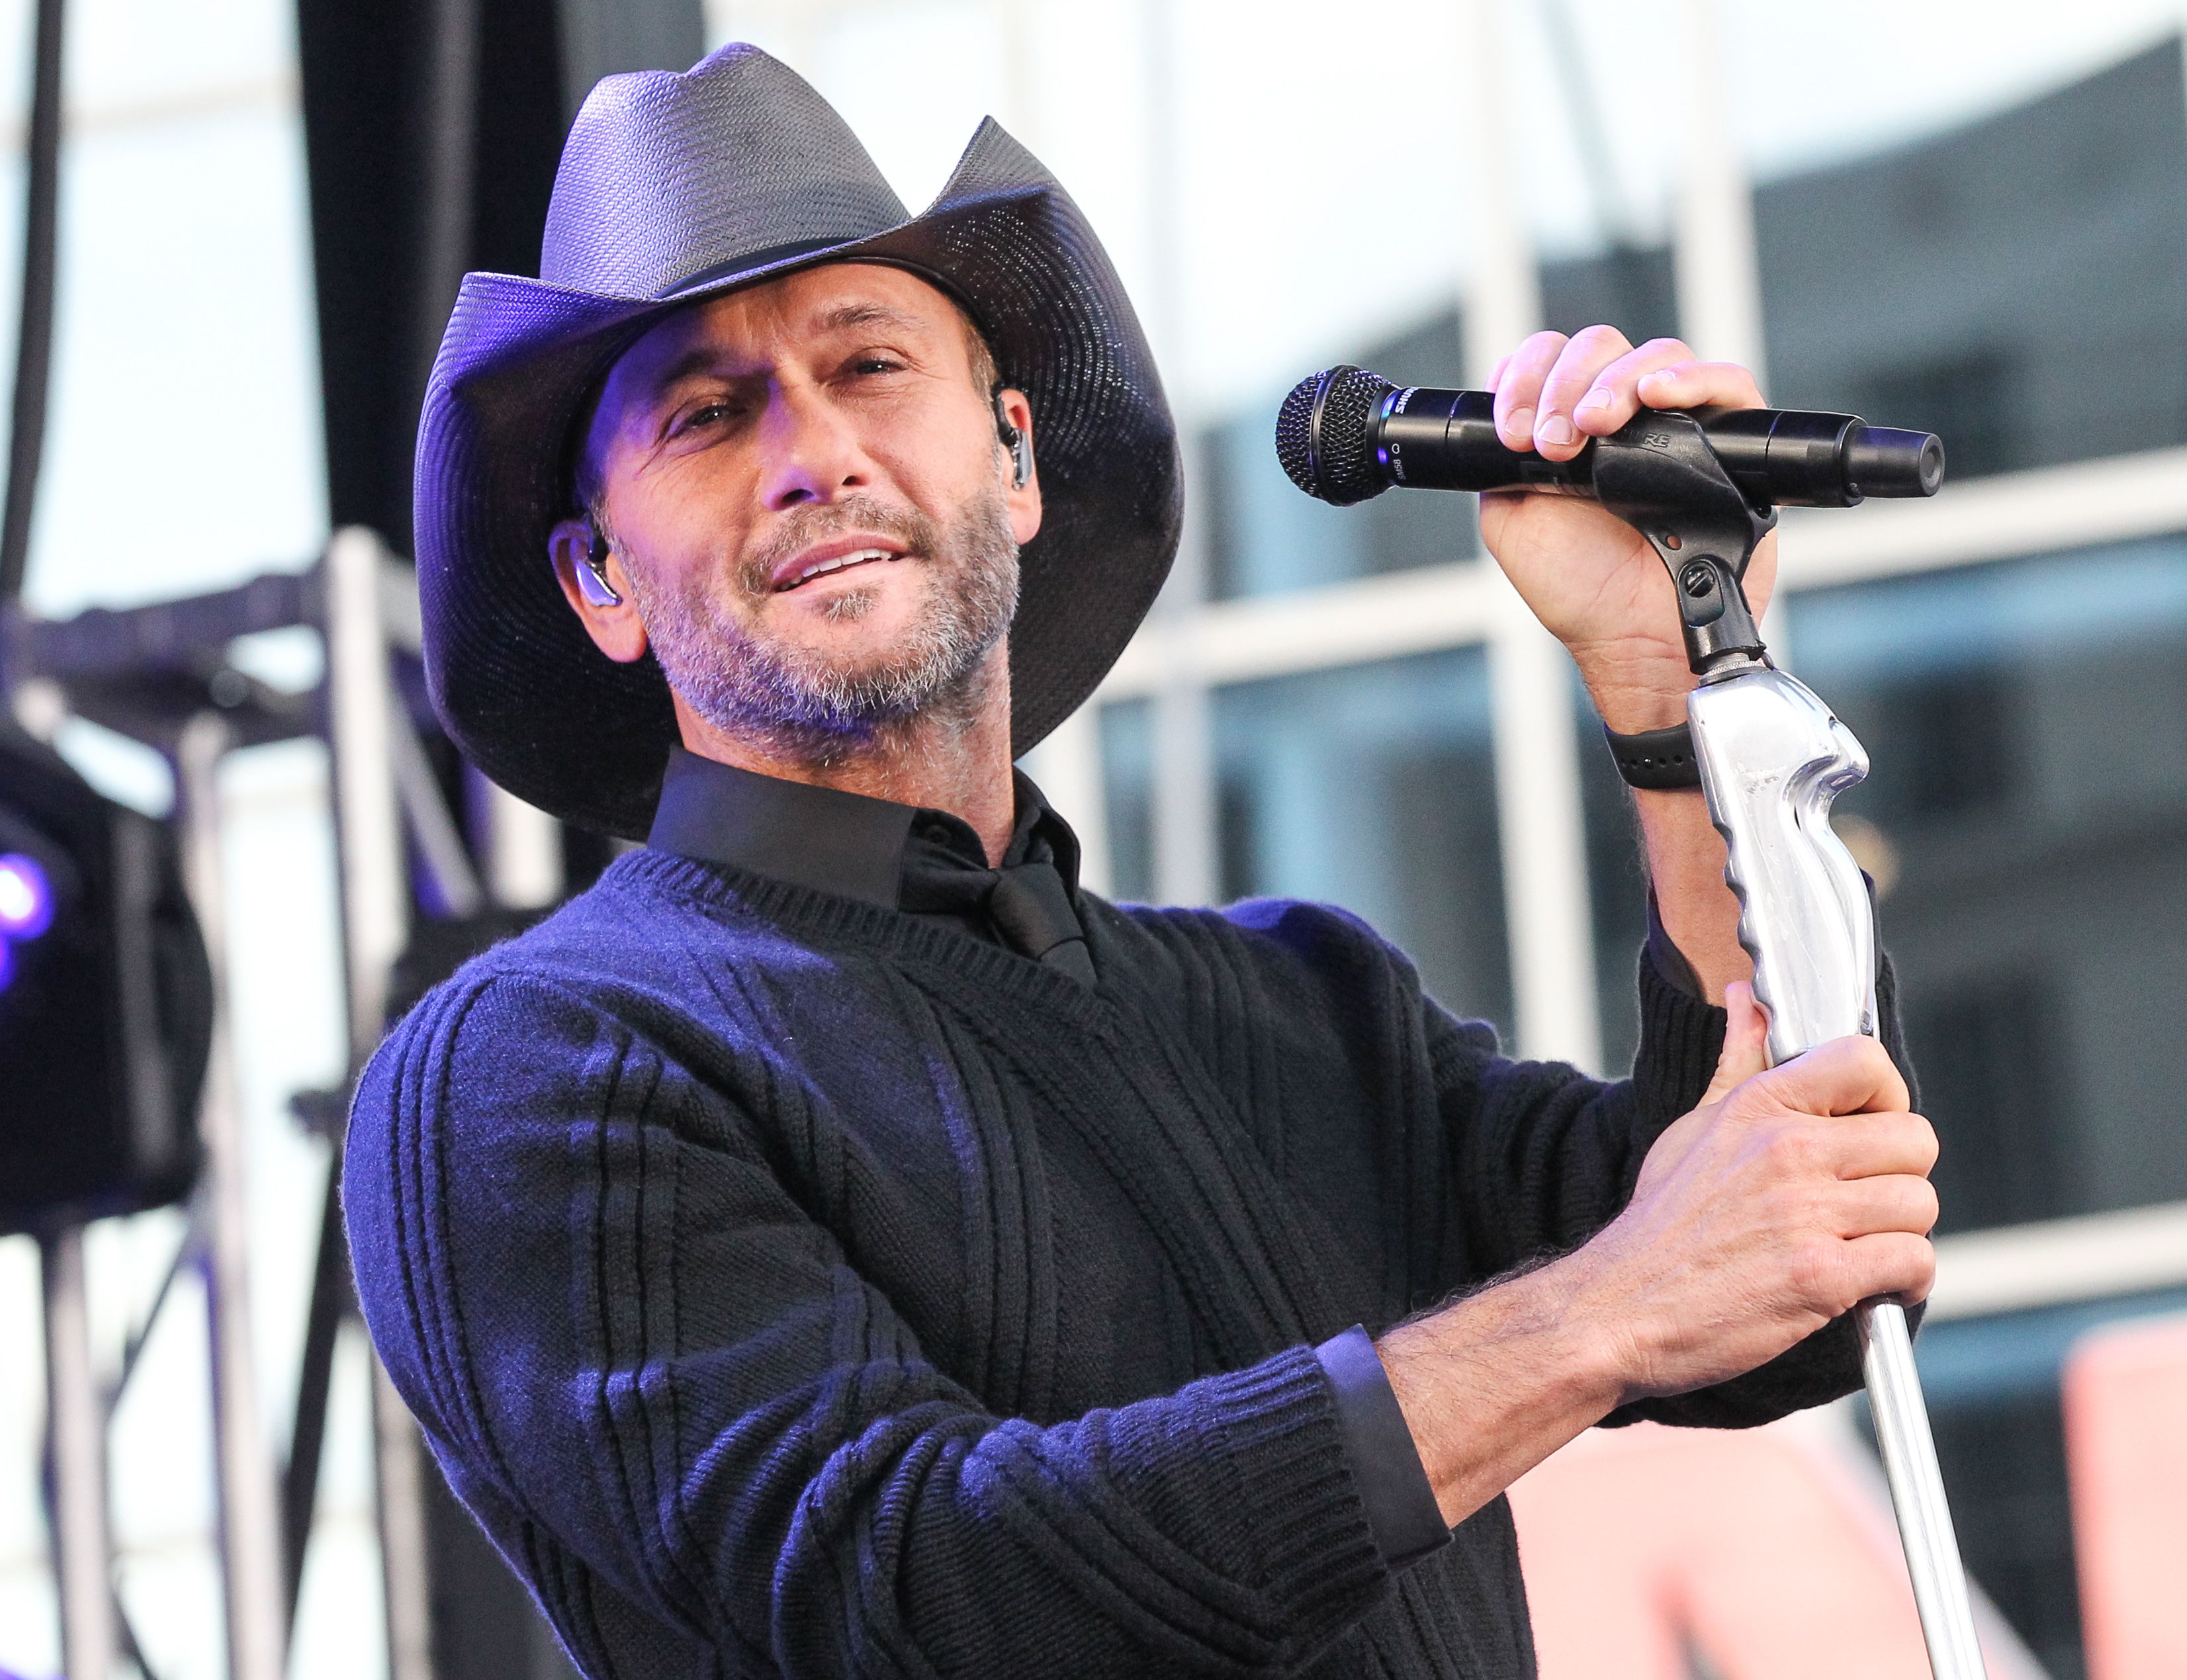  Singer Tim McGraw Performs On ABC's "Good Morning America"on November 4, 2015 | Photo: Getty Images